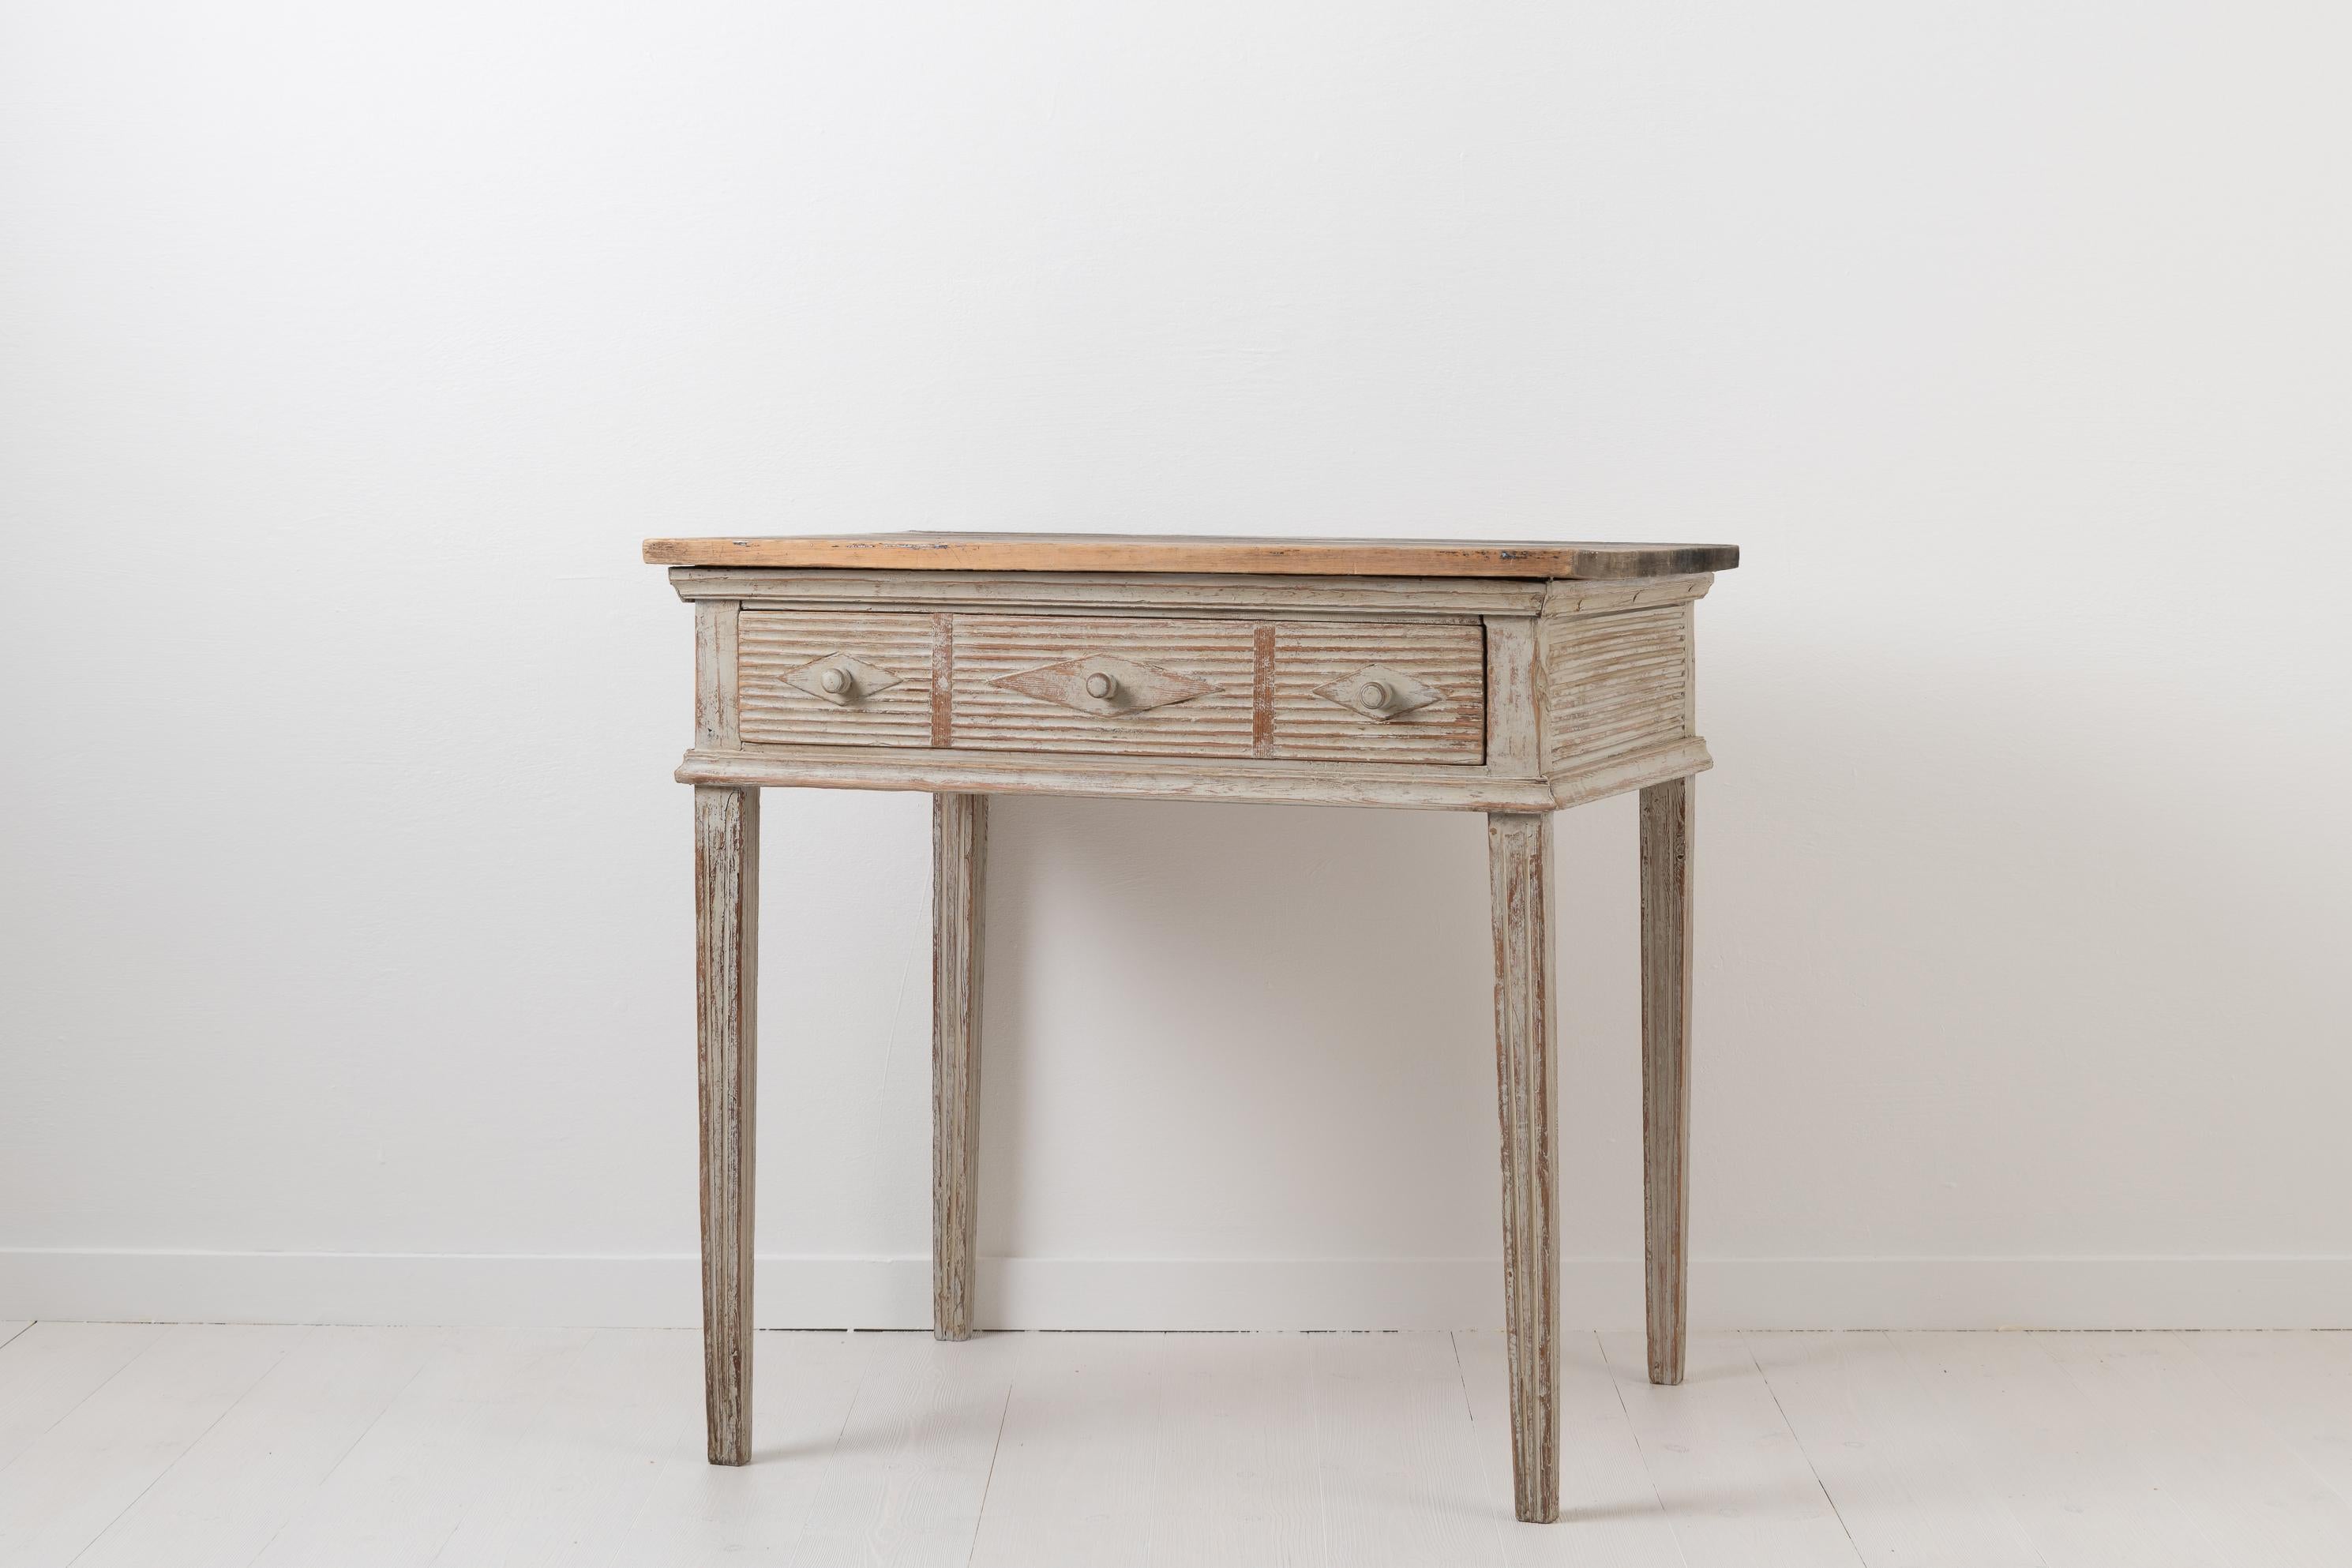 Gustavian wall table from northern Sweden, made circa 1790. The table has the recognizable straight lines and delicate detailing of the Gustavian period. Characteristic straight legs with a vertical fluted decor. The late 1700s was the Swedish